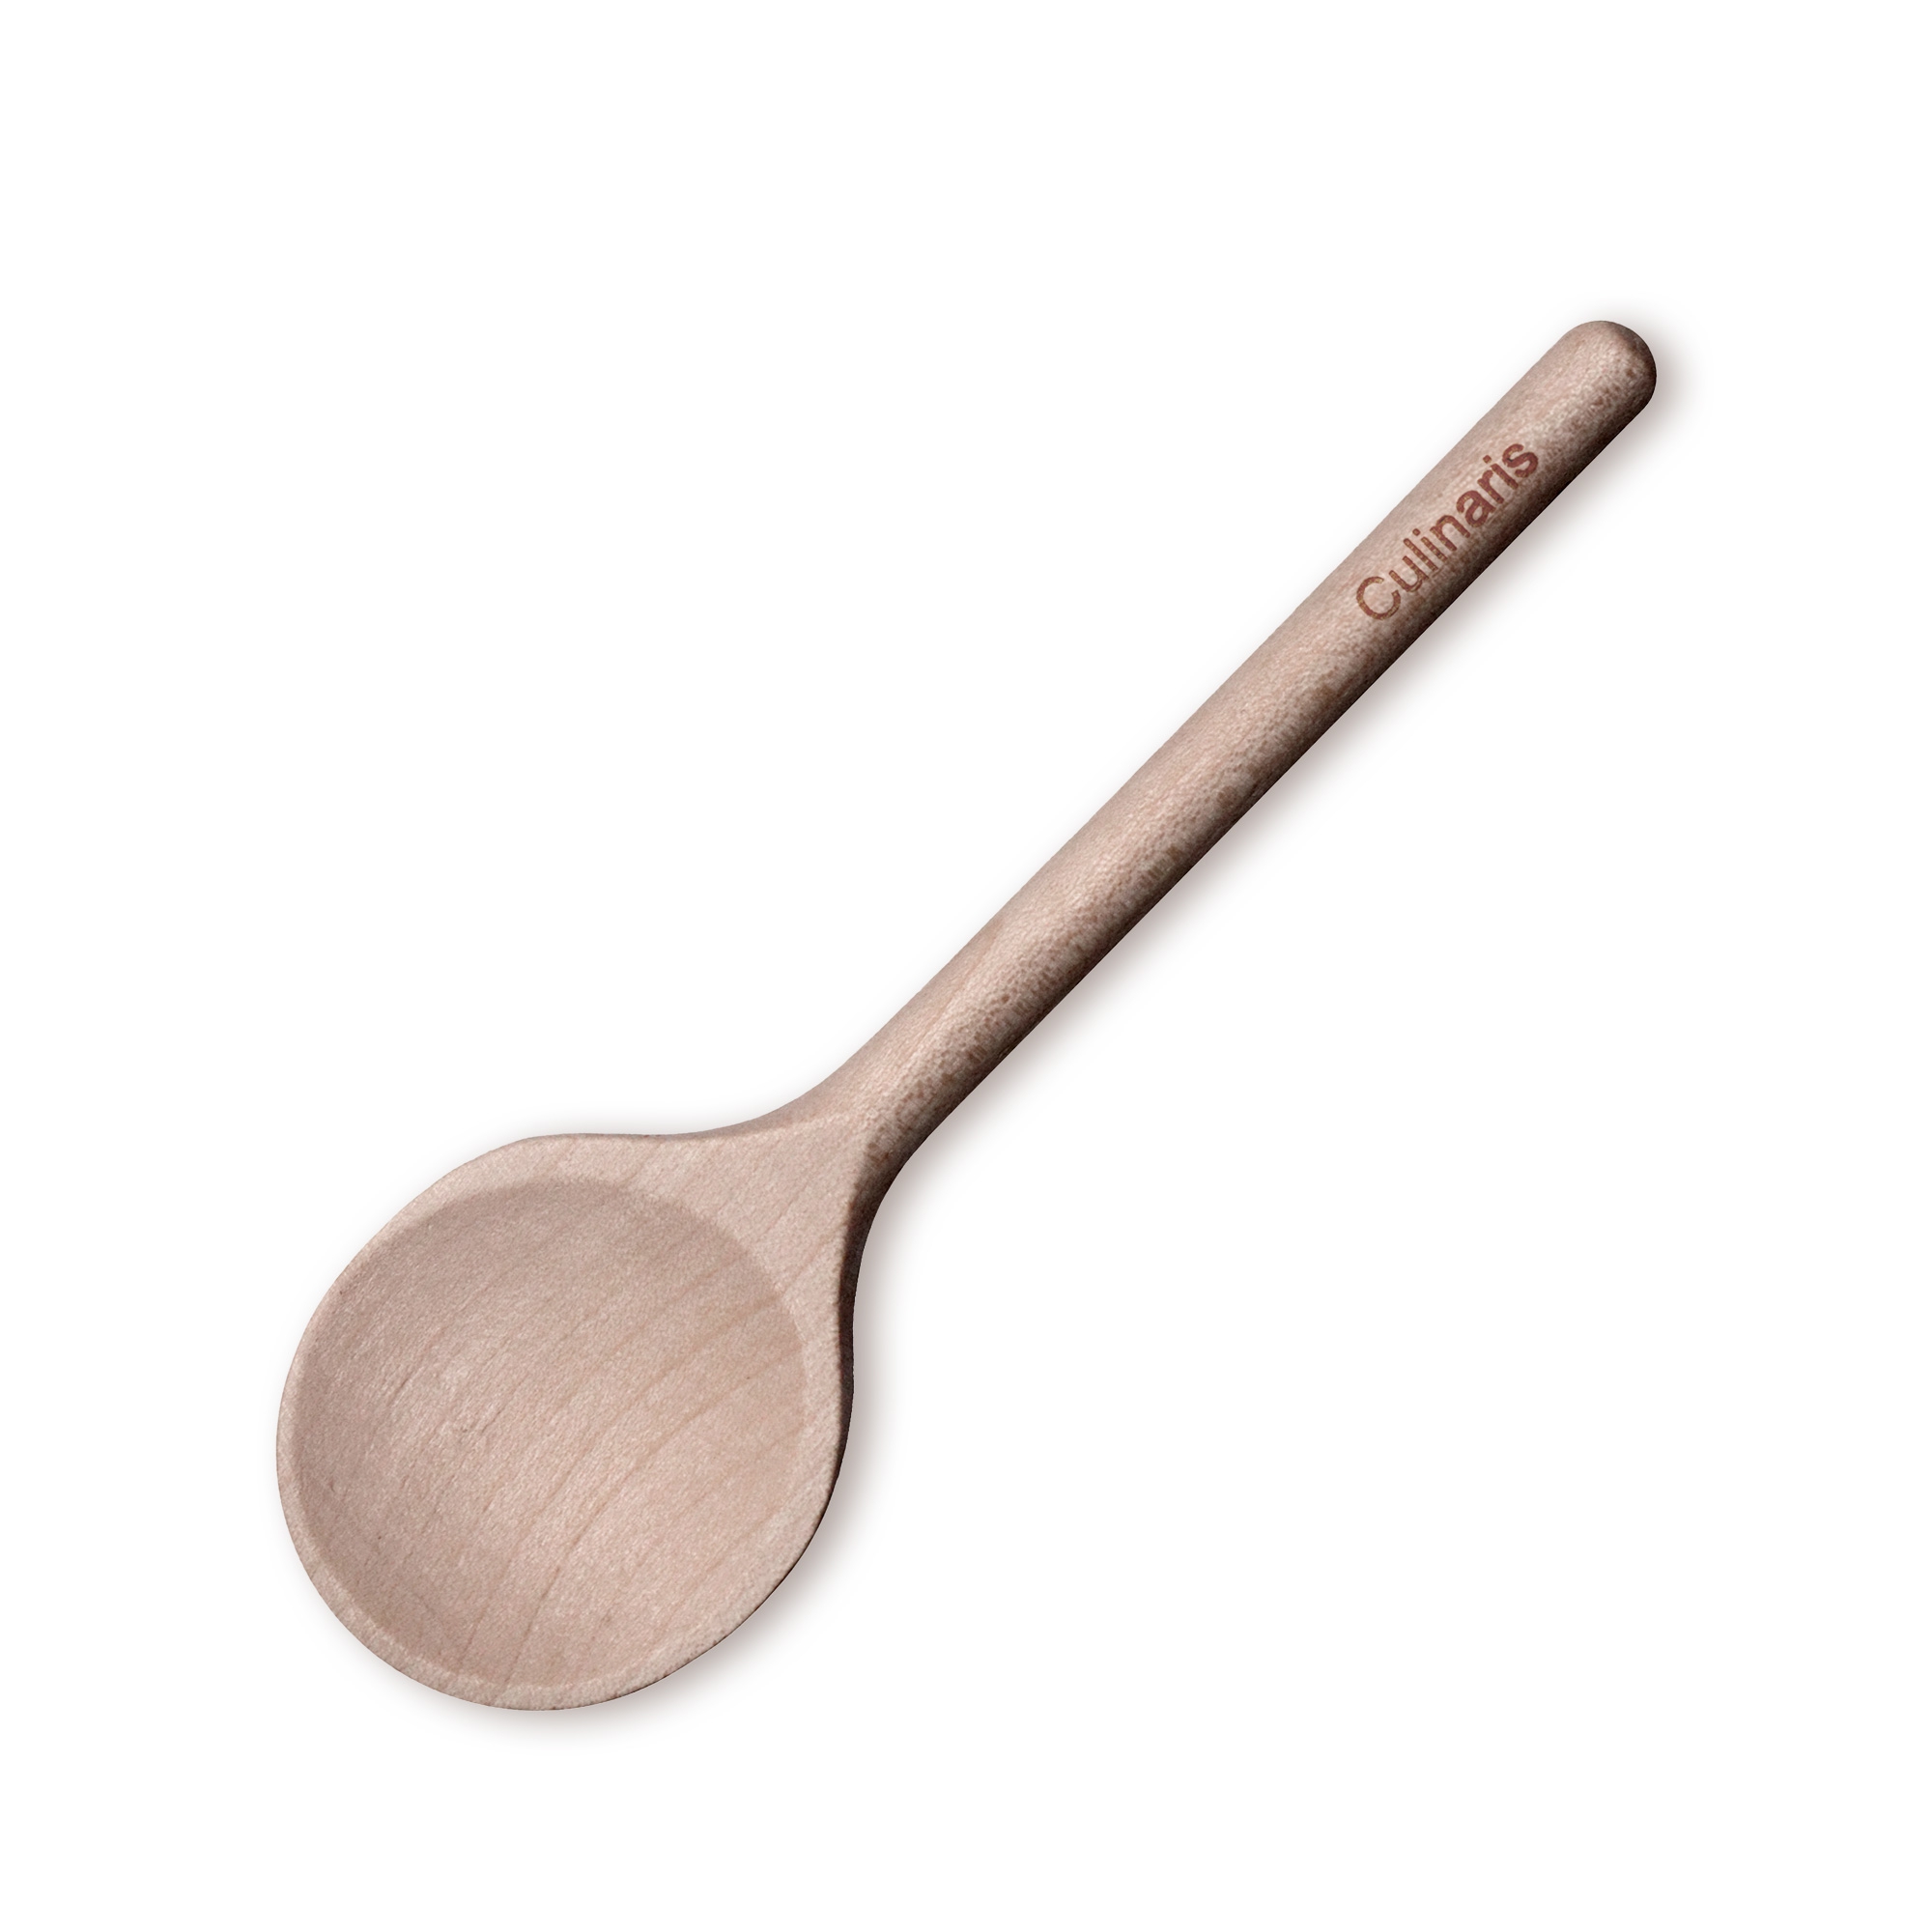 Culinaris - round cooking spoon made of maple wood 12cm